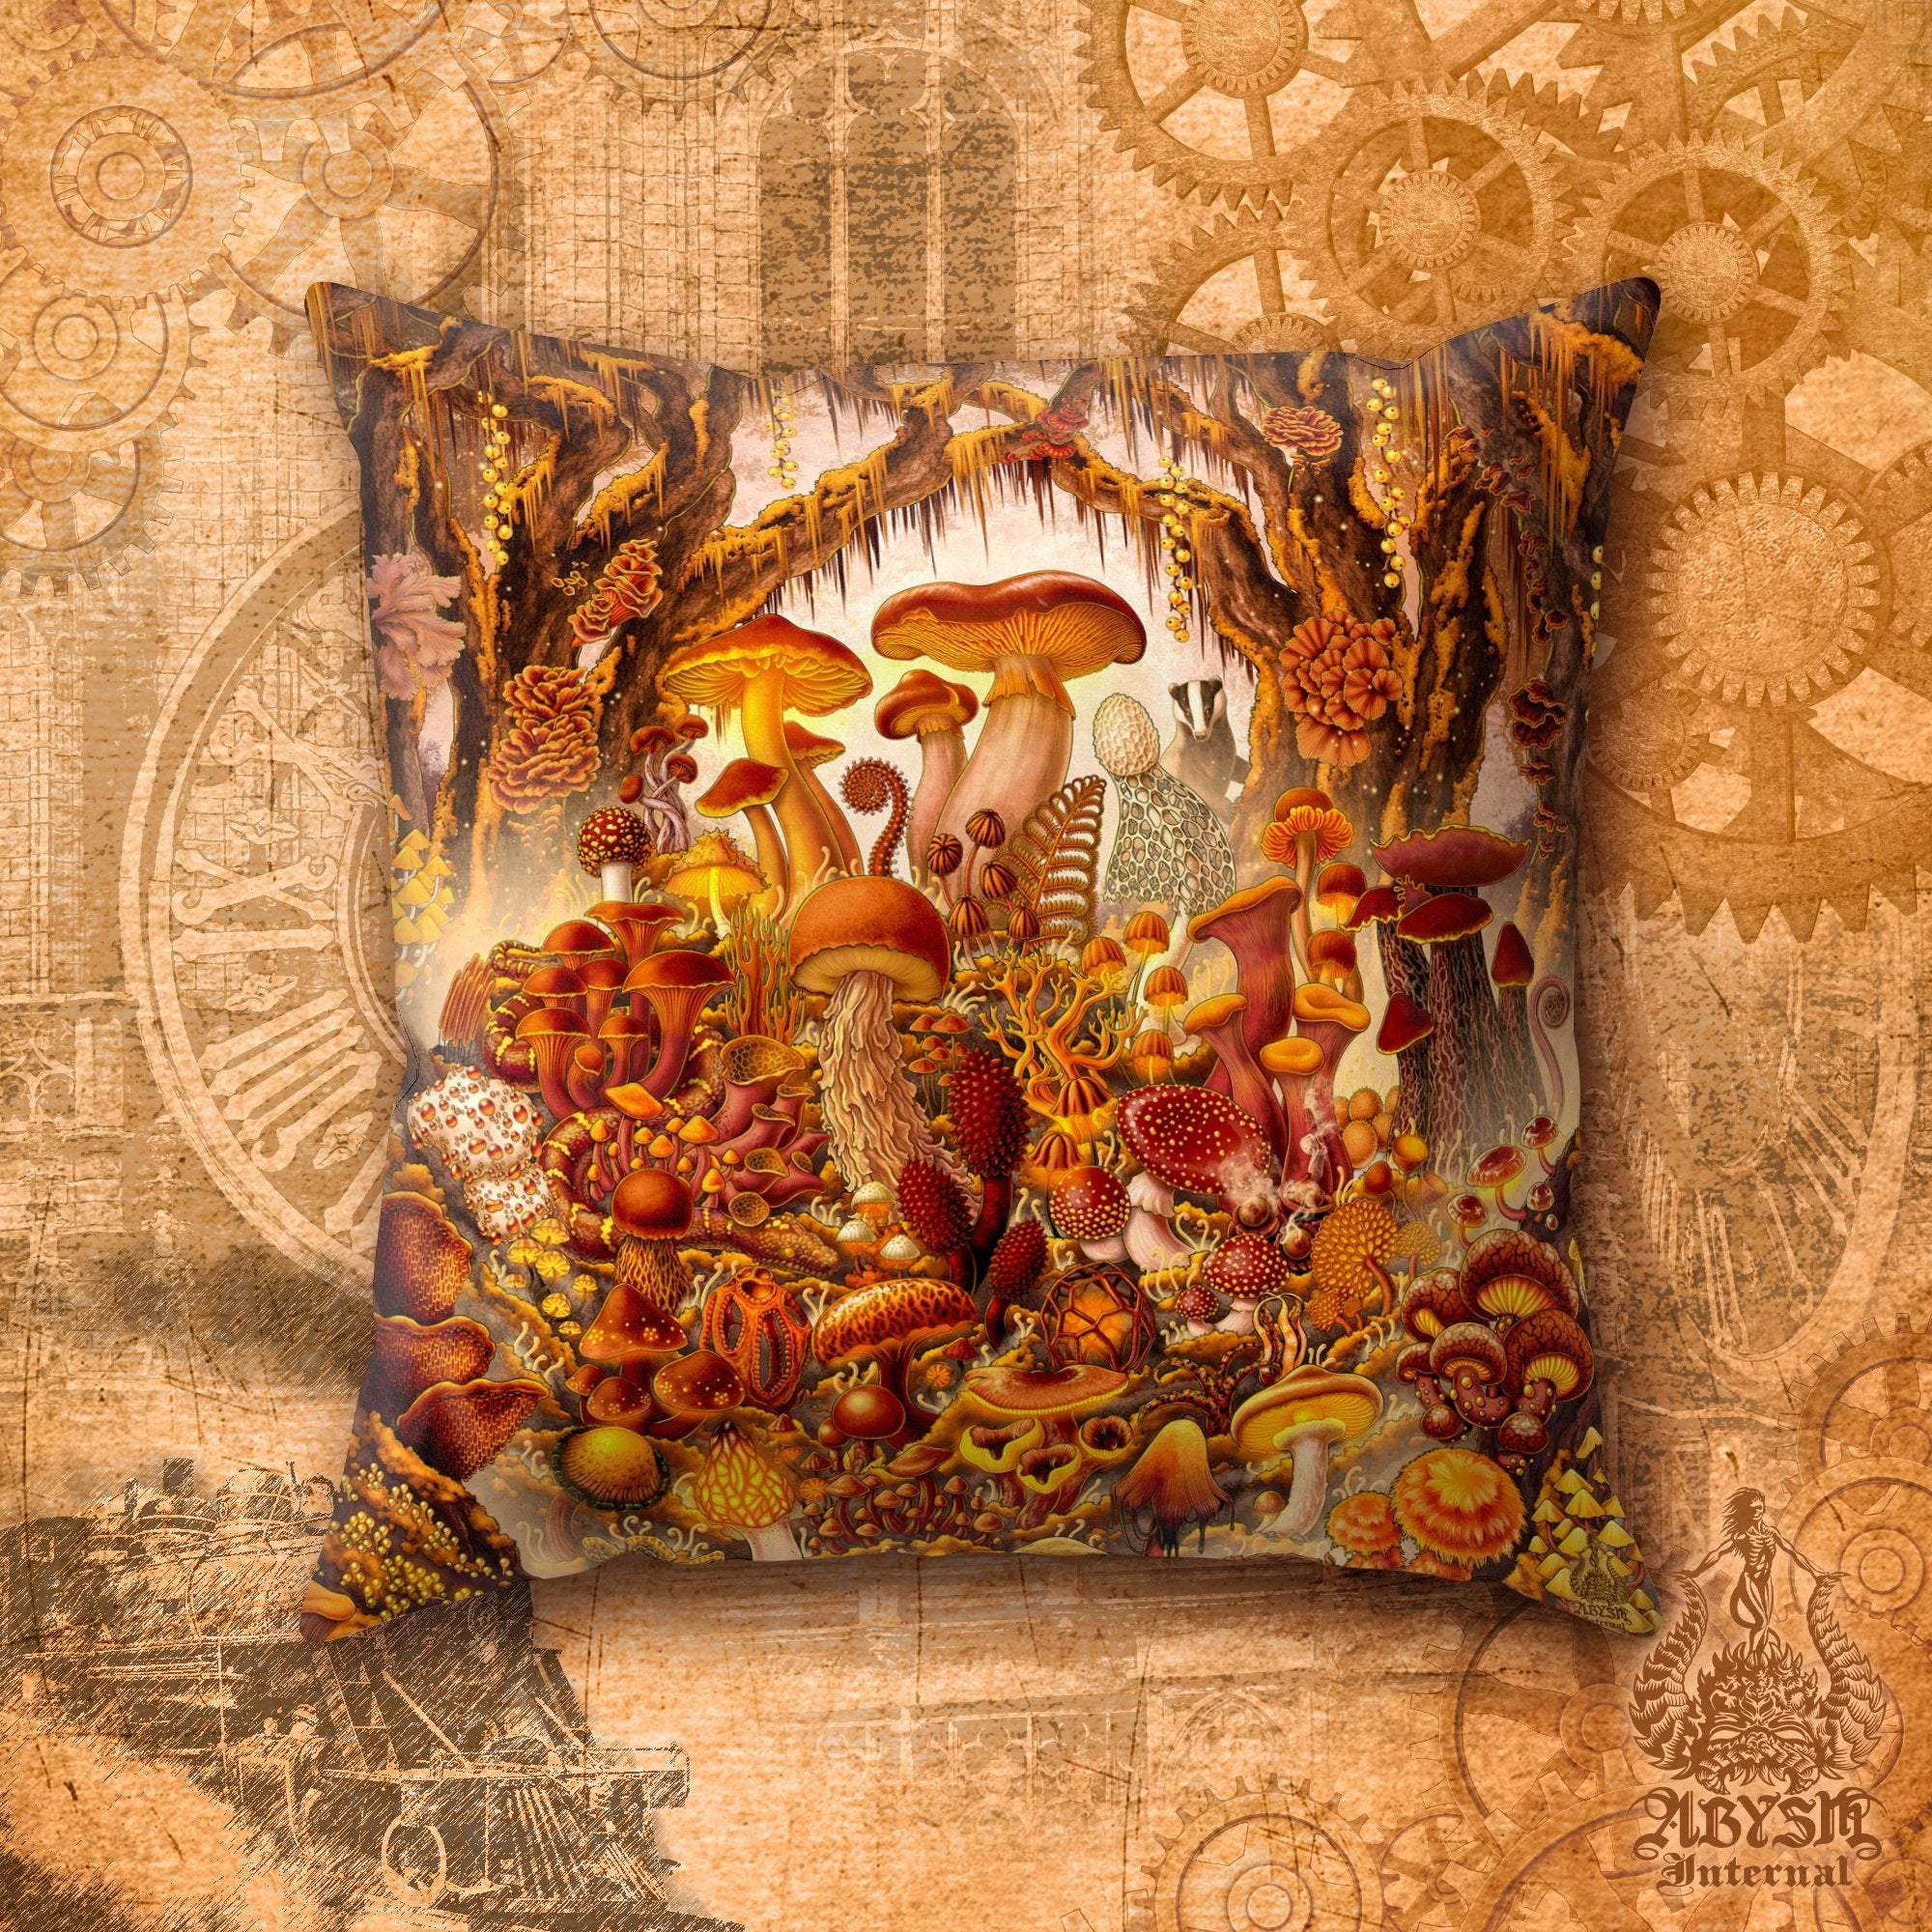 Mushrooms Throw Pillow, Decorative Accent Cushion, Indie Room Decor, Mycology Art Print, Mycologist Gift - Steampunk - Abysm Internal